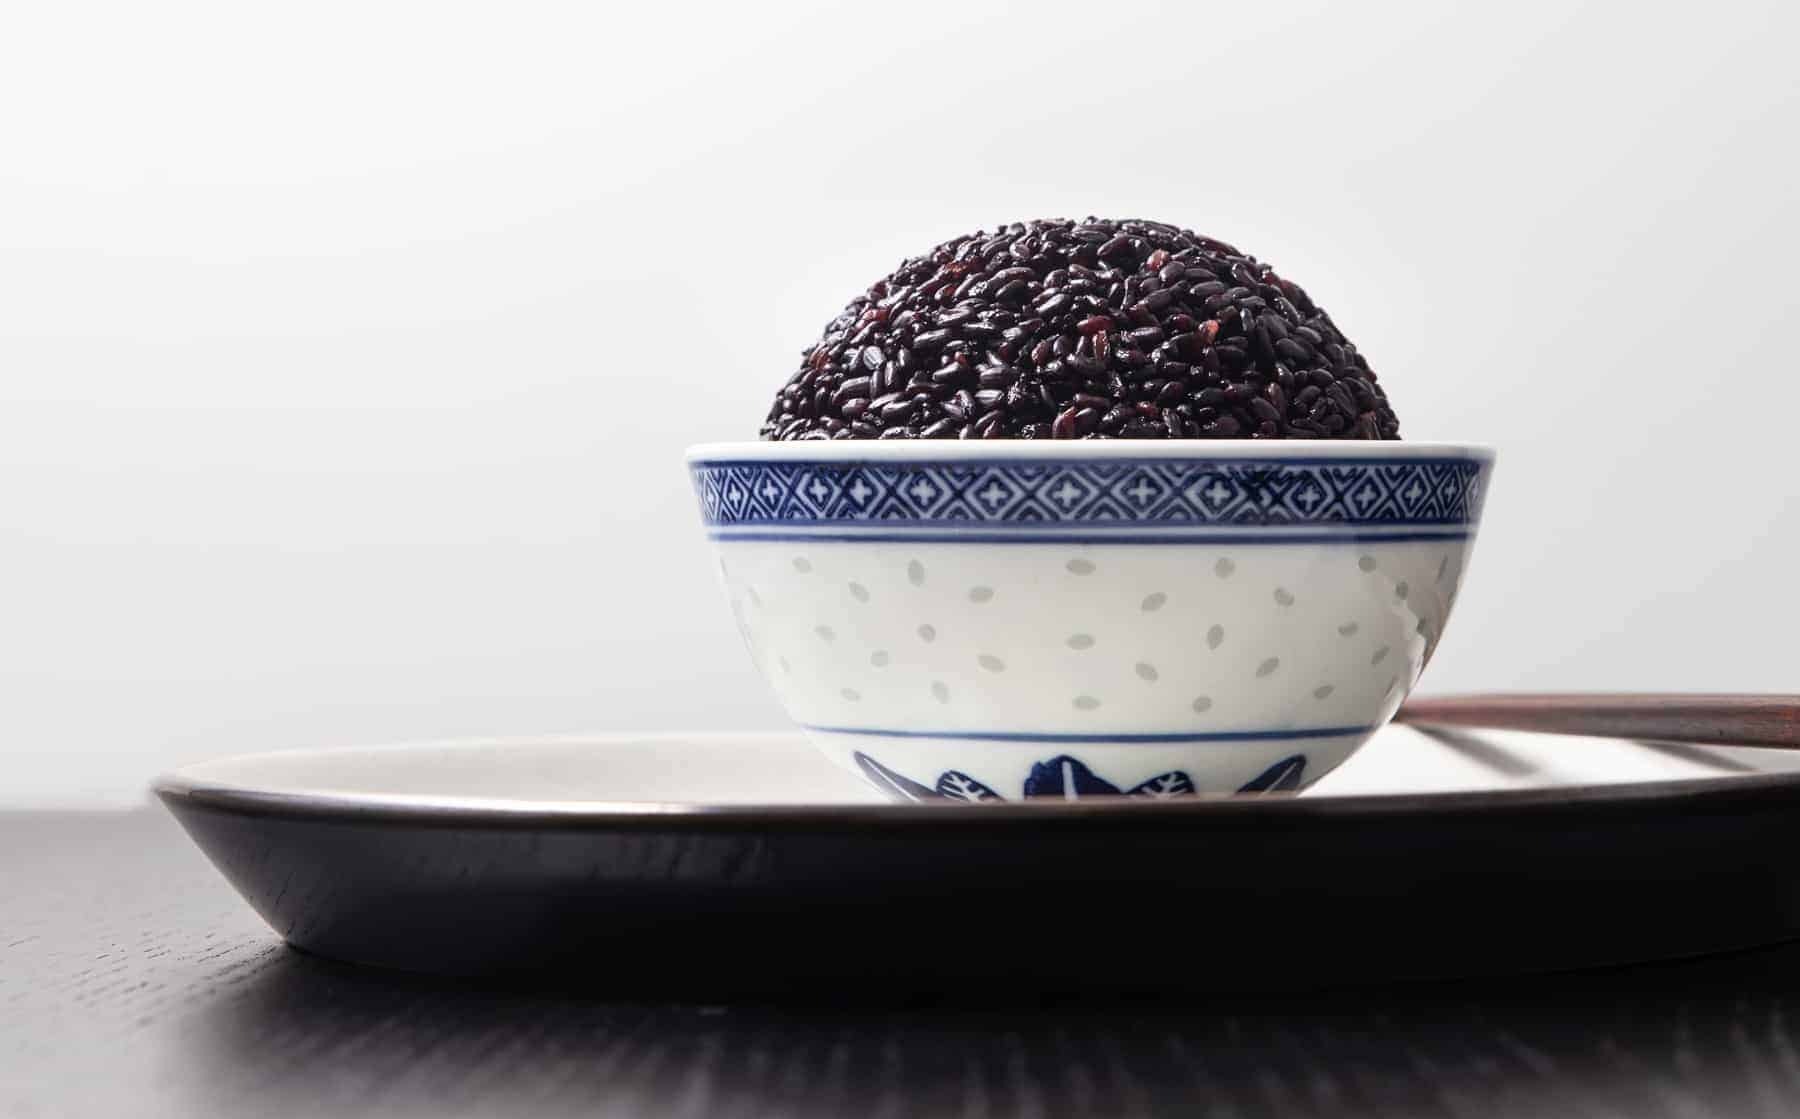 How to Cook Black Rice in Rice Cooker - Foolproof Living